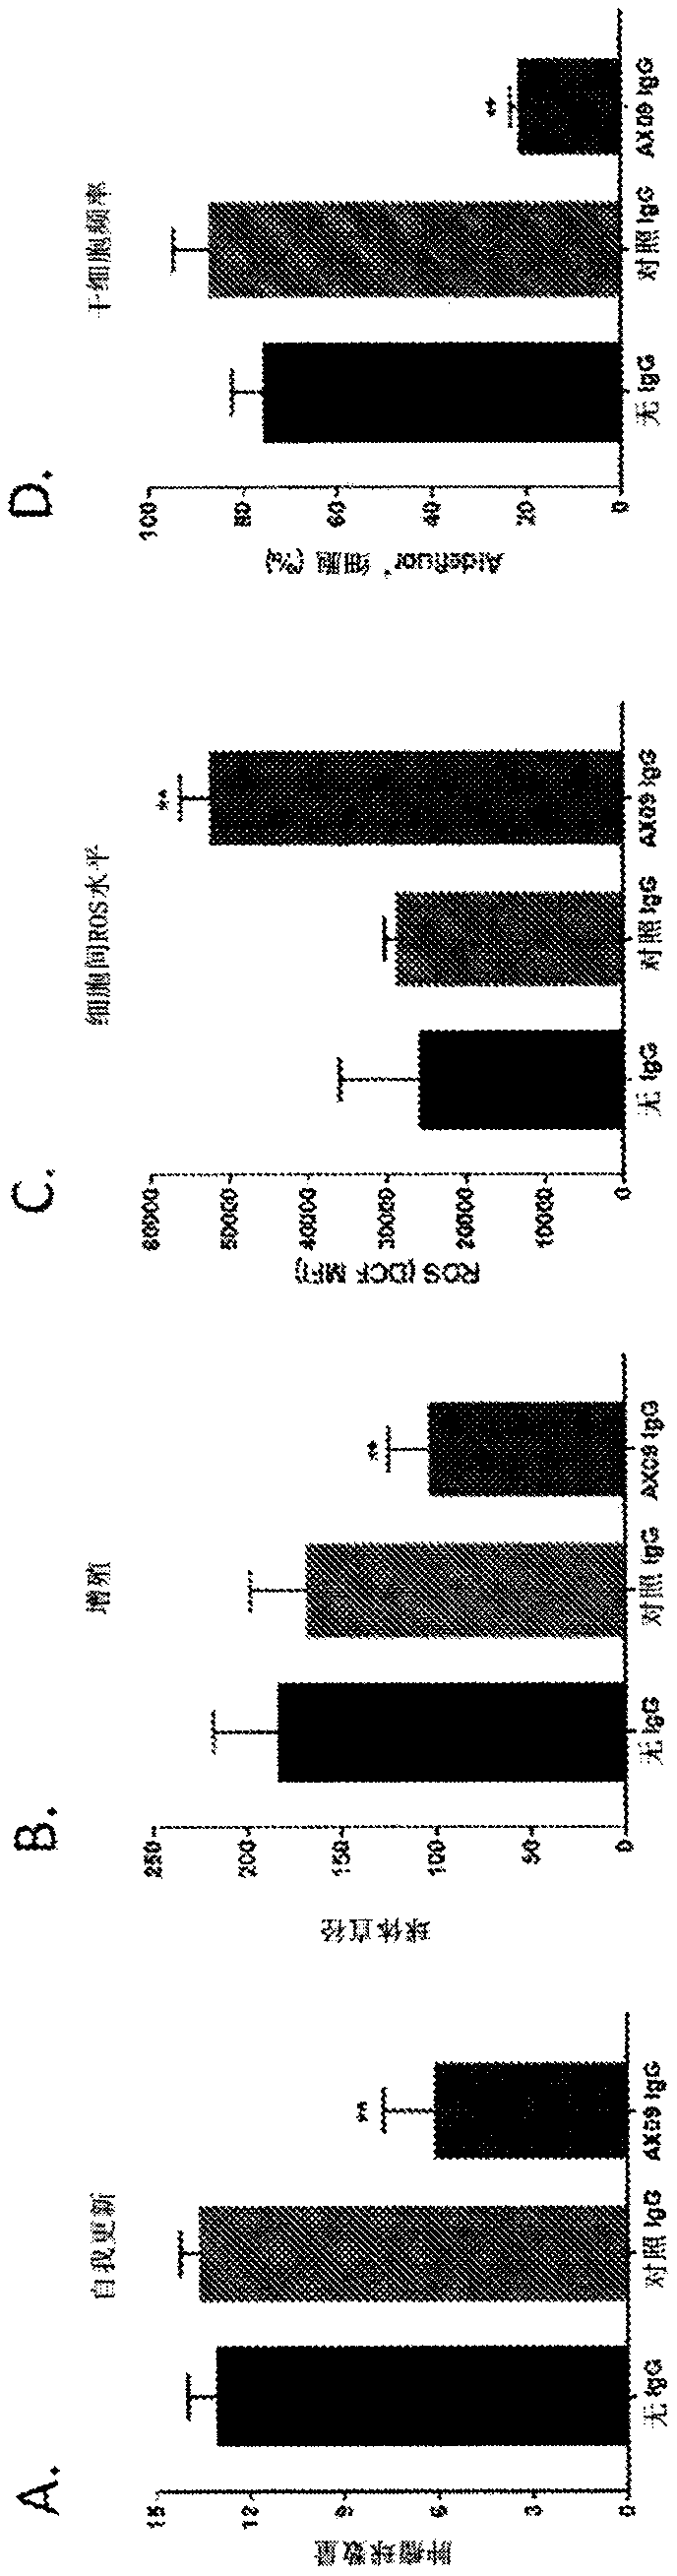 COMPOSITIONS AND METHODS RELATED TO xCT ANTIBODIES